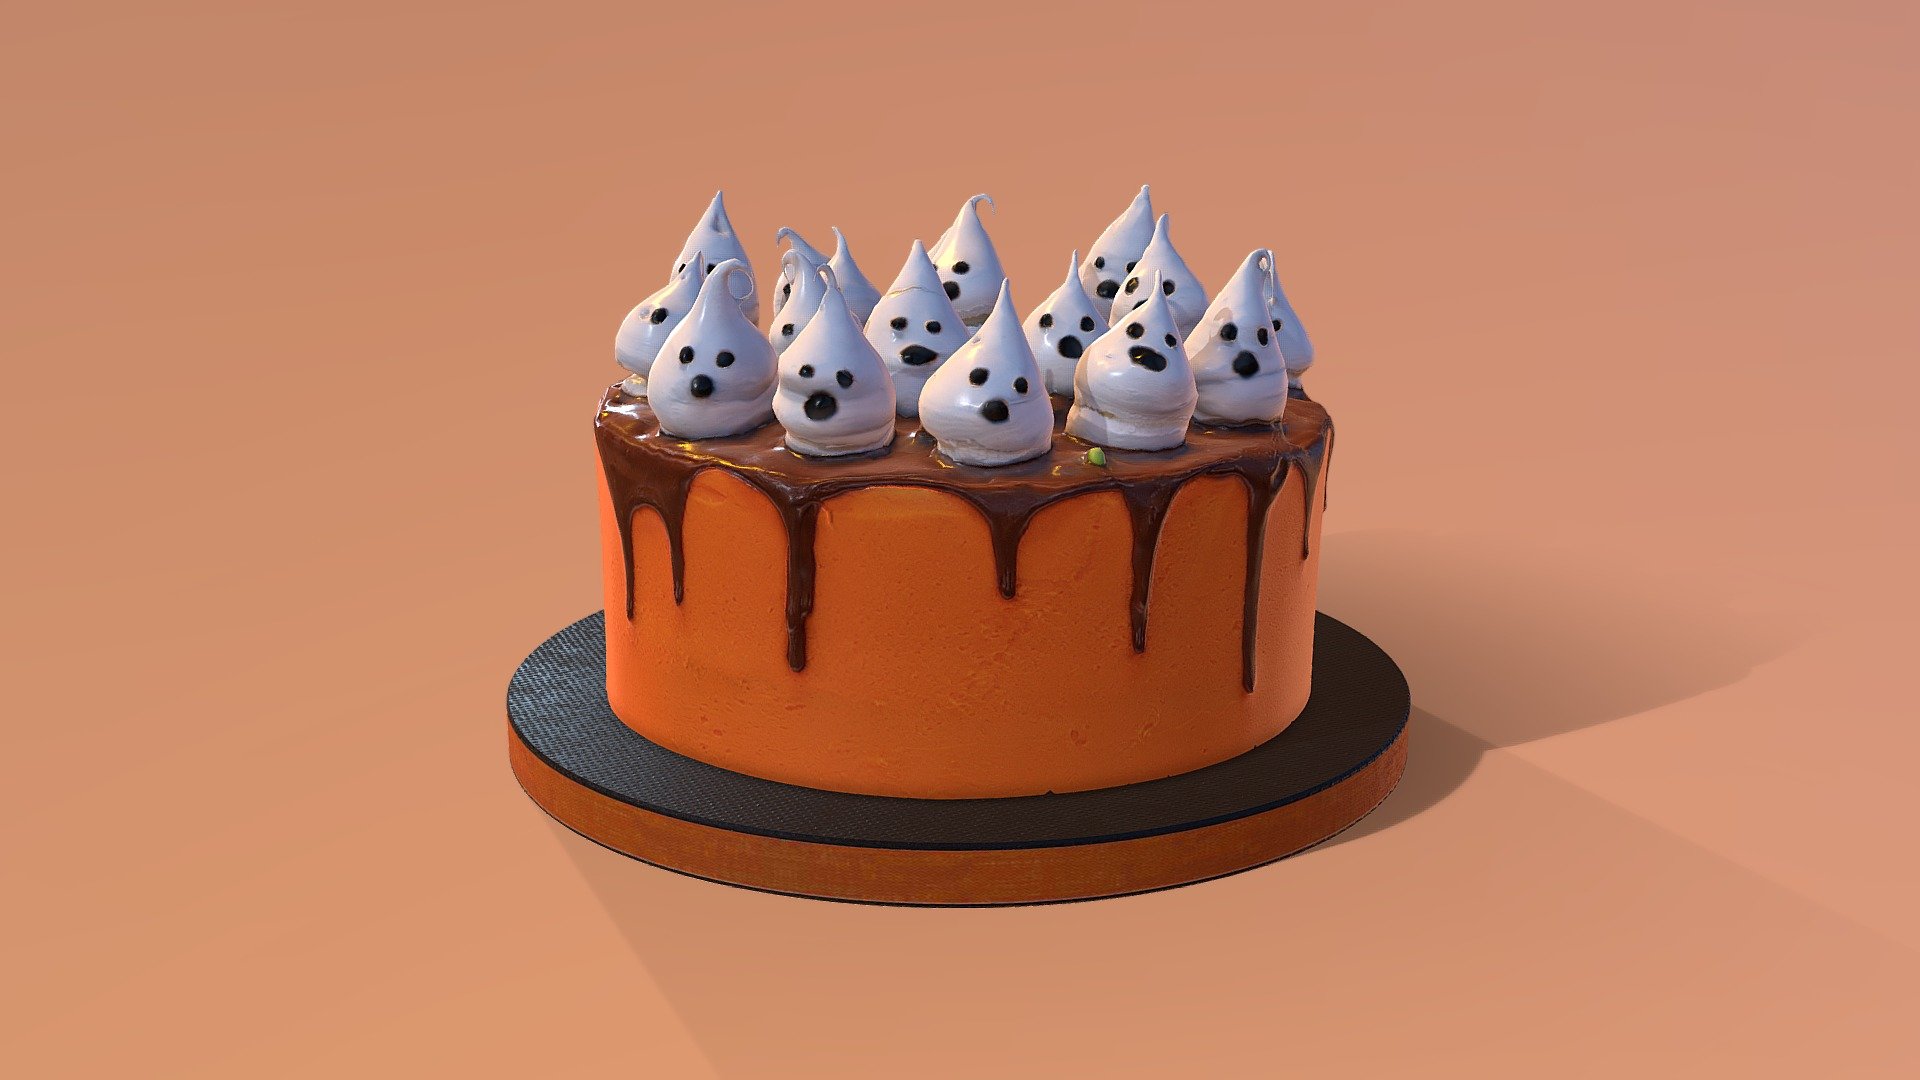 This premium Spooky Meringue Ghosts Cake was created using photogrammetry which is made by CAKESBURG Premium Cake Shop in the UK. You can purchase real cake from this link: https://cakesburg.co.uk/products/spooky-ghosts-halloween-cake

Slice Textures 4096*4096px PBR photoscan-based materials (Base Color, Normal, Roughness, Specular, AO) - Spooky Ghosts Halloween Cake - Buy Royalty Free 3D model by Cakesburg Premium 3D Cake Shop (@Viscom_Cakesburg) 3d model